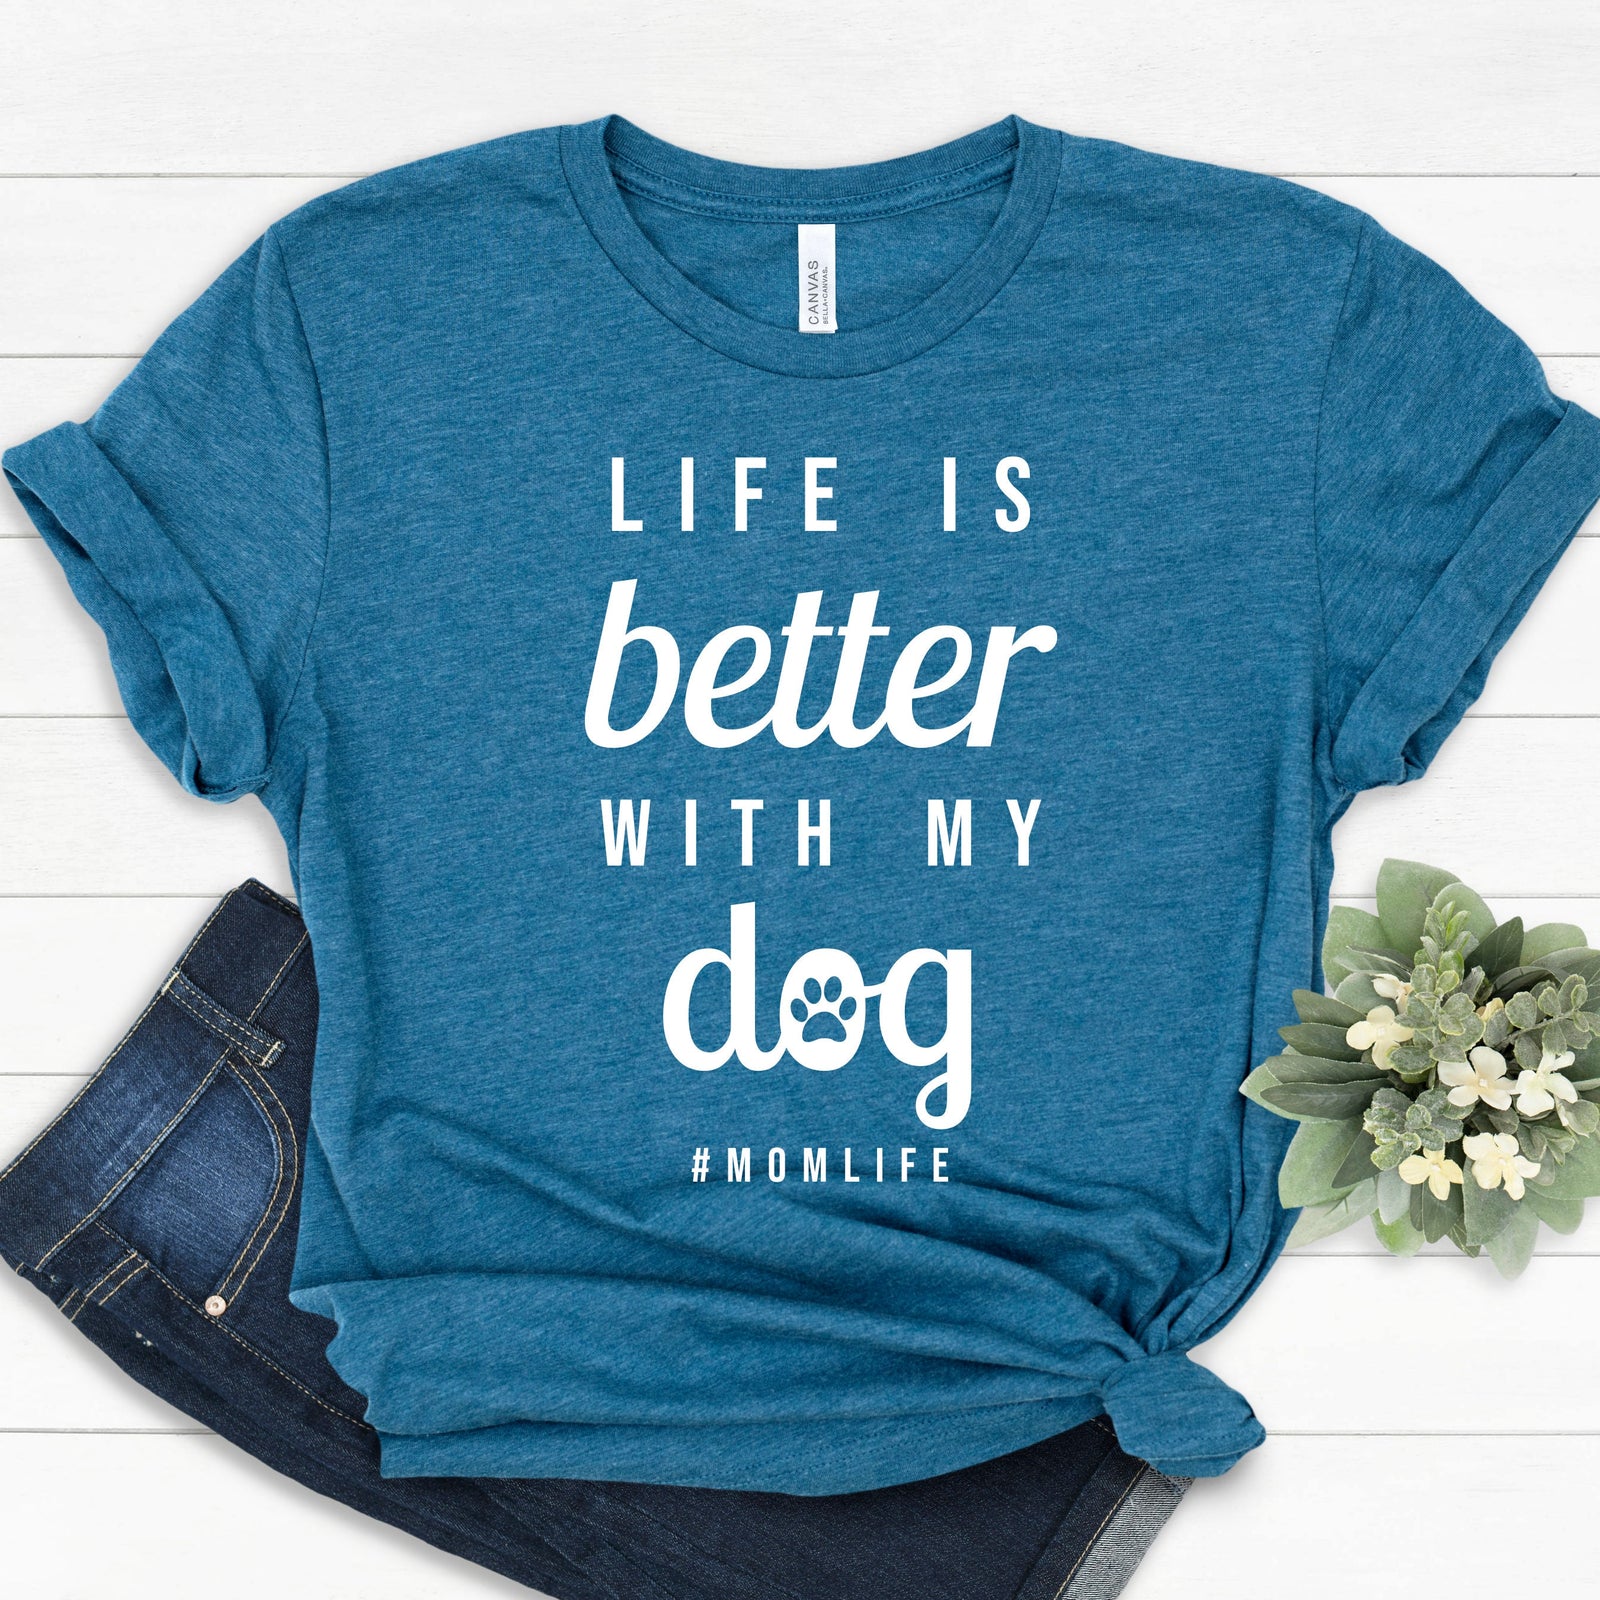 Life is Better with My Dog T Shirt - Dog Lover - Pet Rescue T Shirt - Funny Dog Mom Shirt